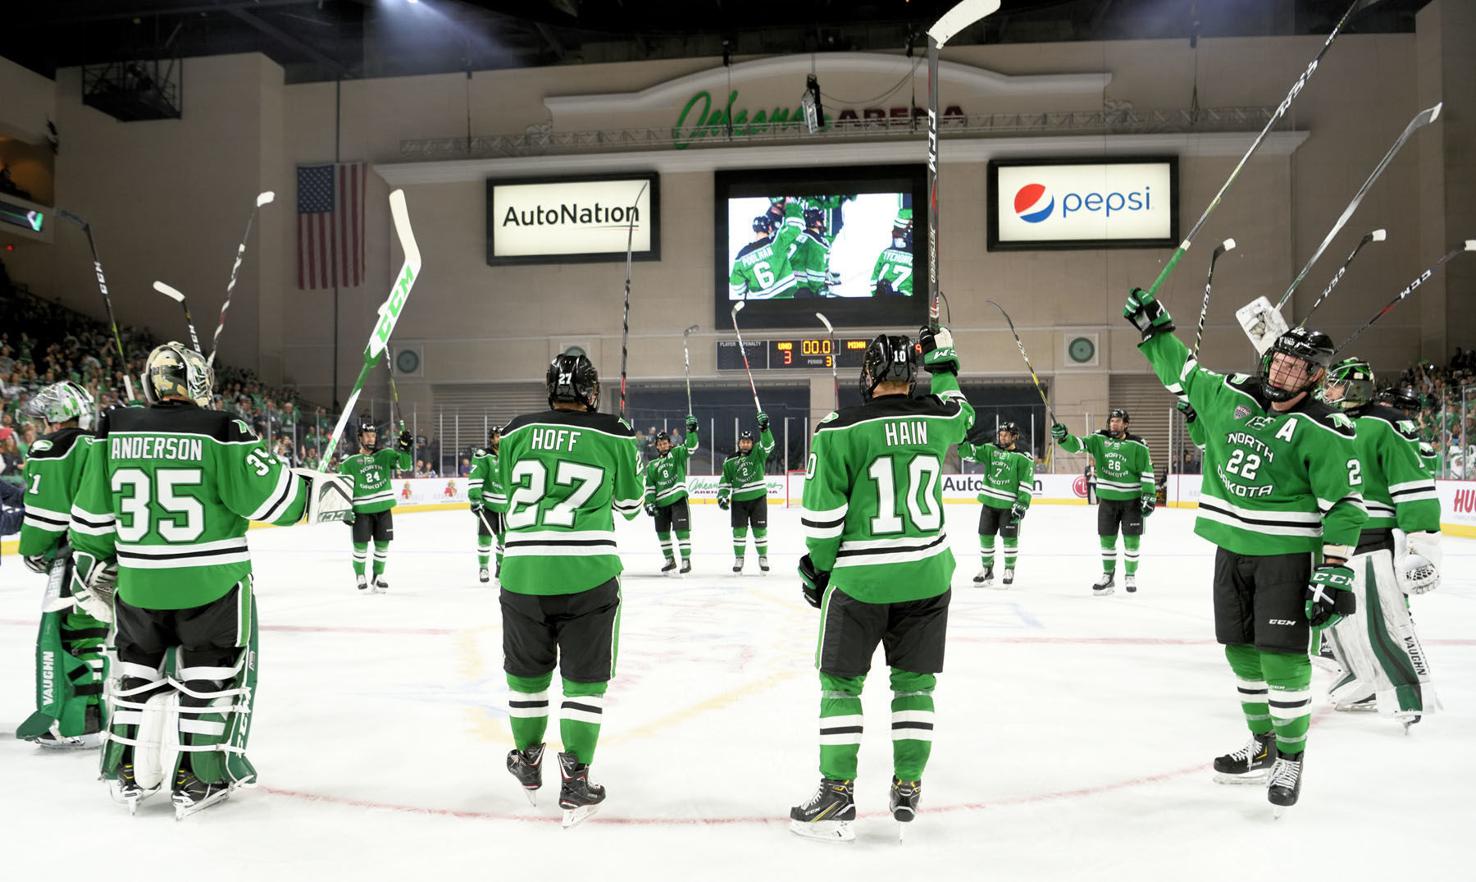 UND has benefited from deal to host U.S. Hockey Hall of Fame Games